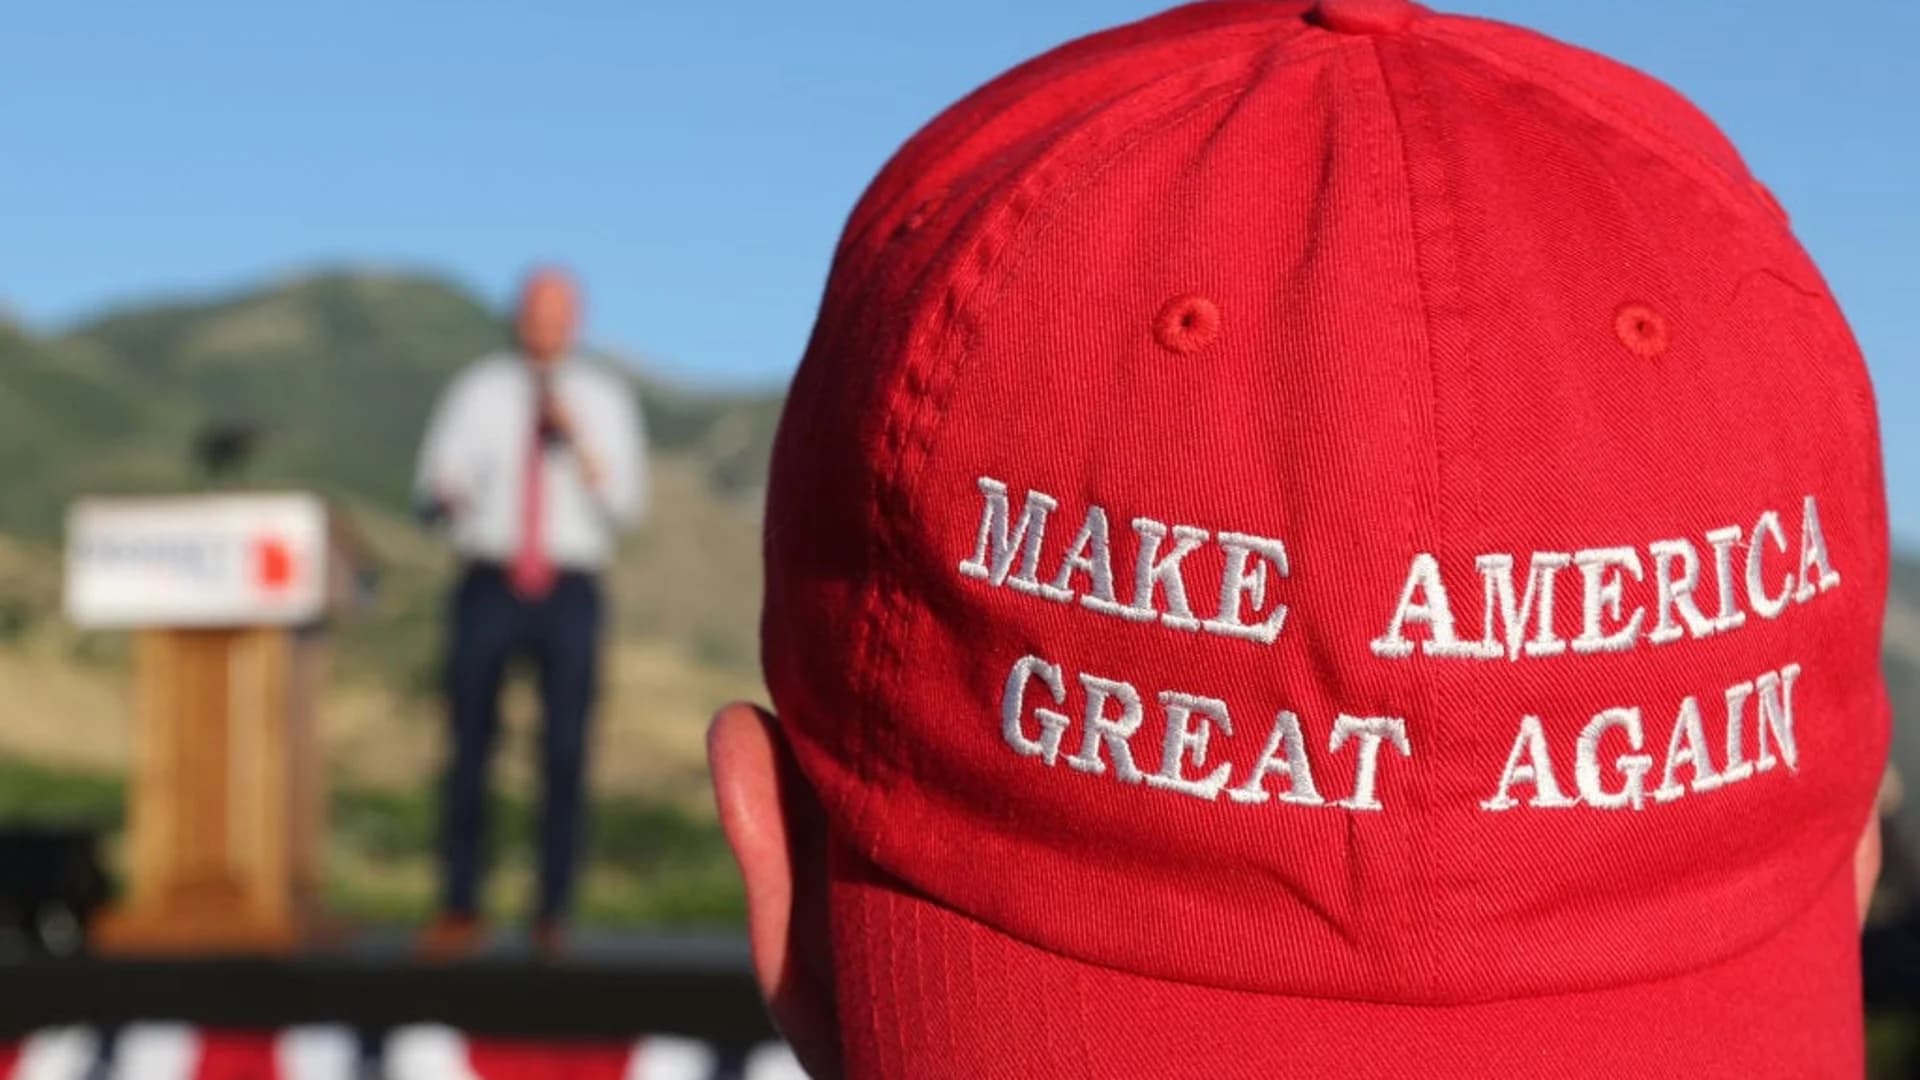 Police: 19-year-old arrested for assaulting man in MAGA hat